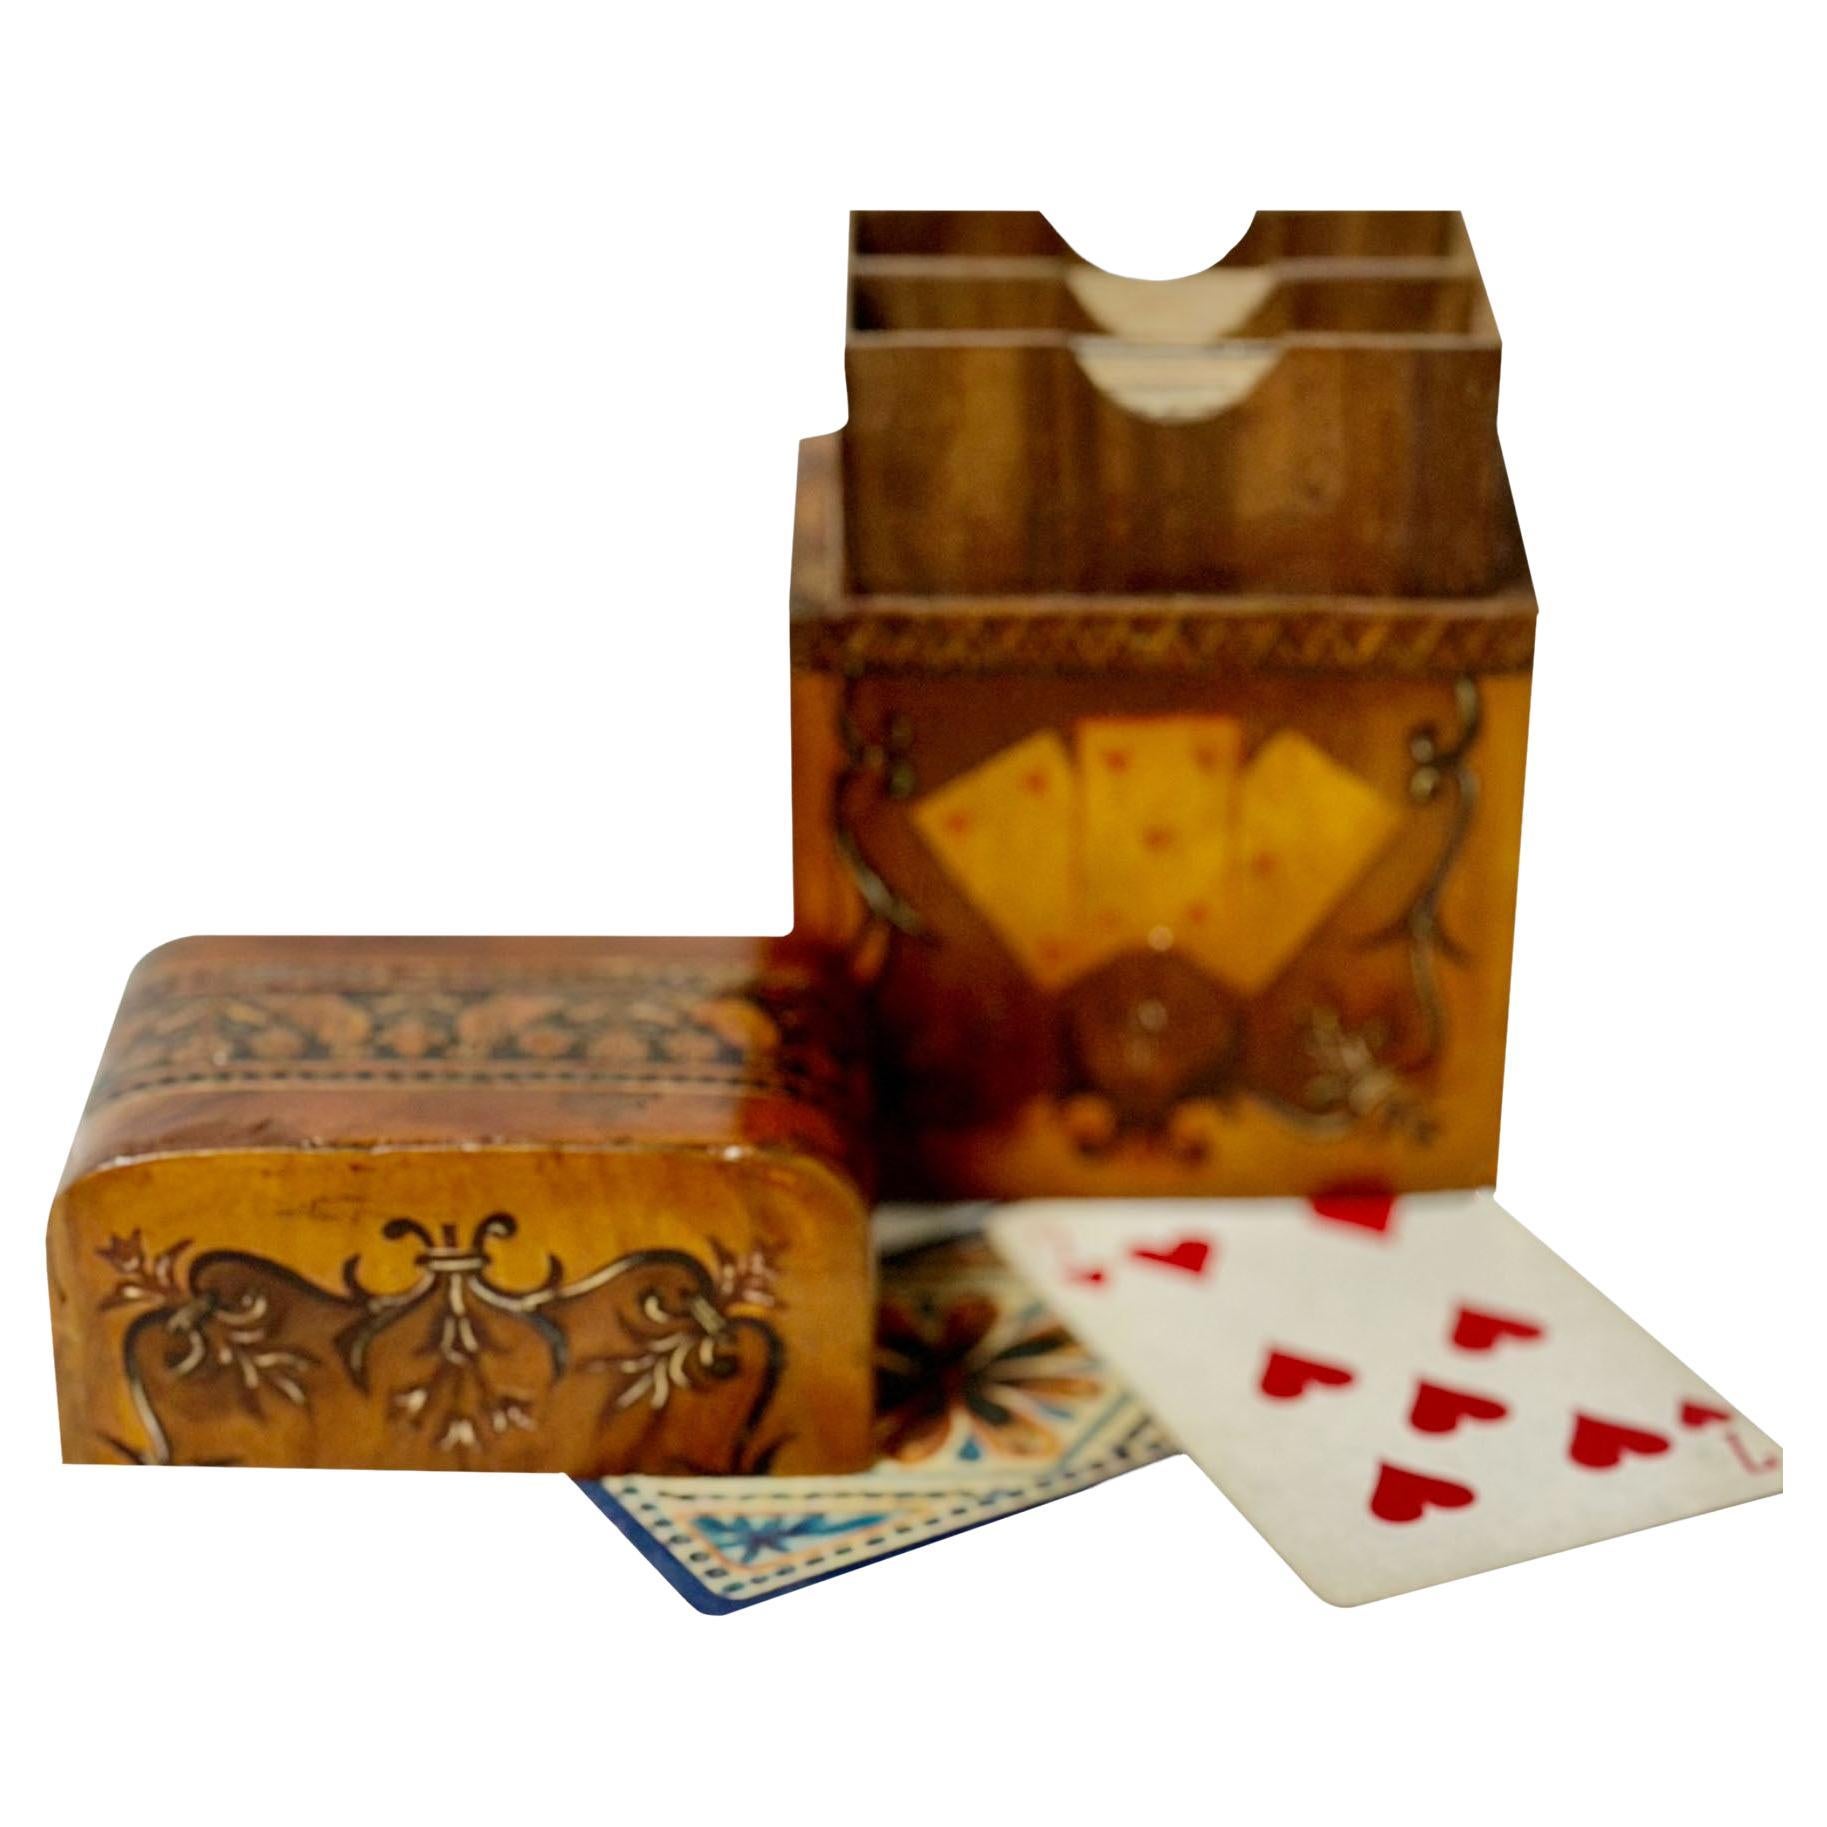 Playing Card Box For Sale